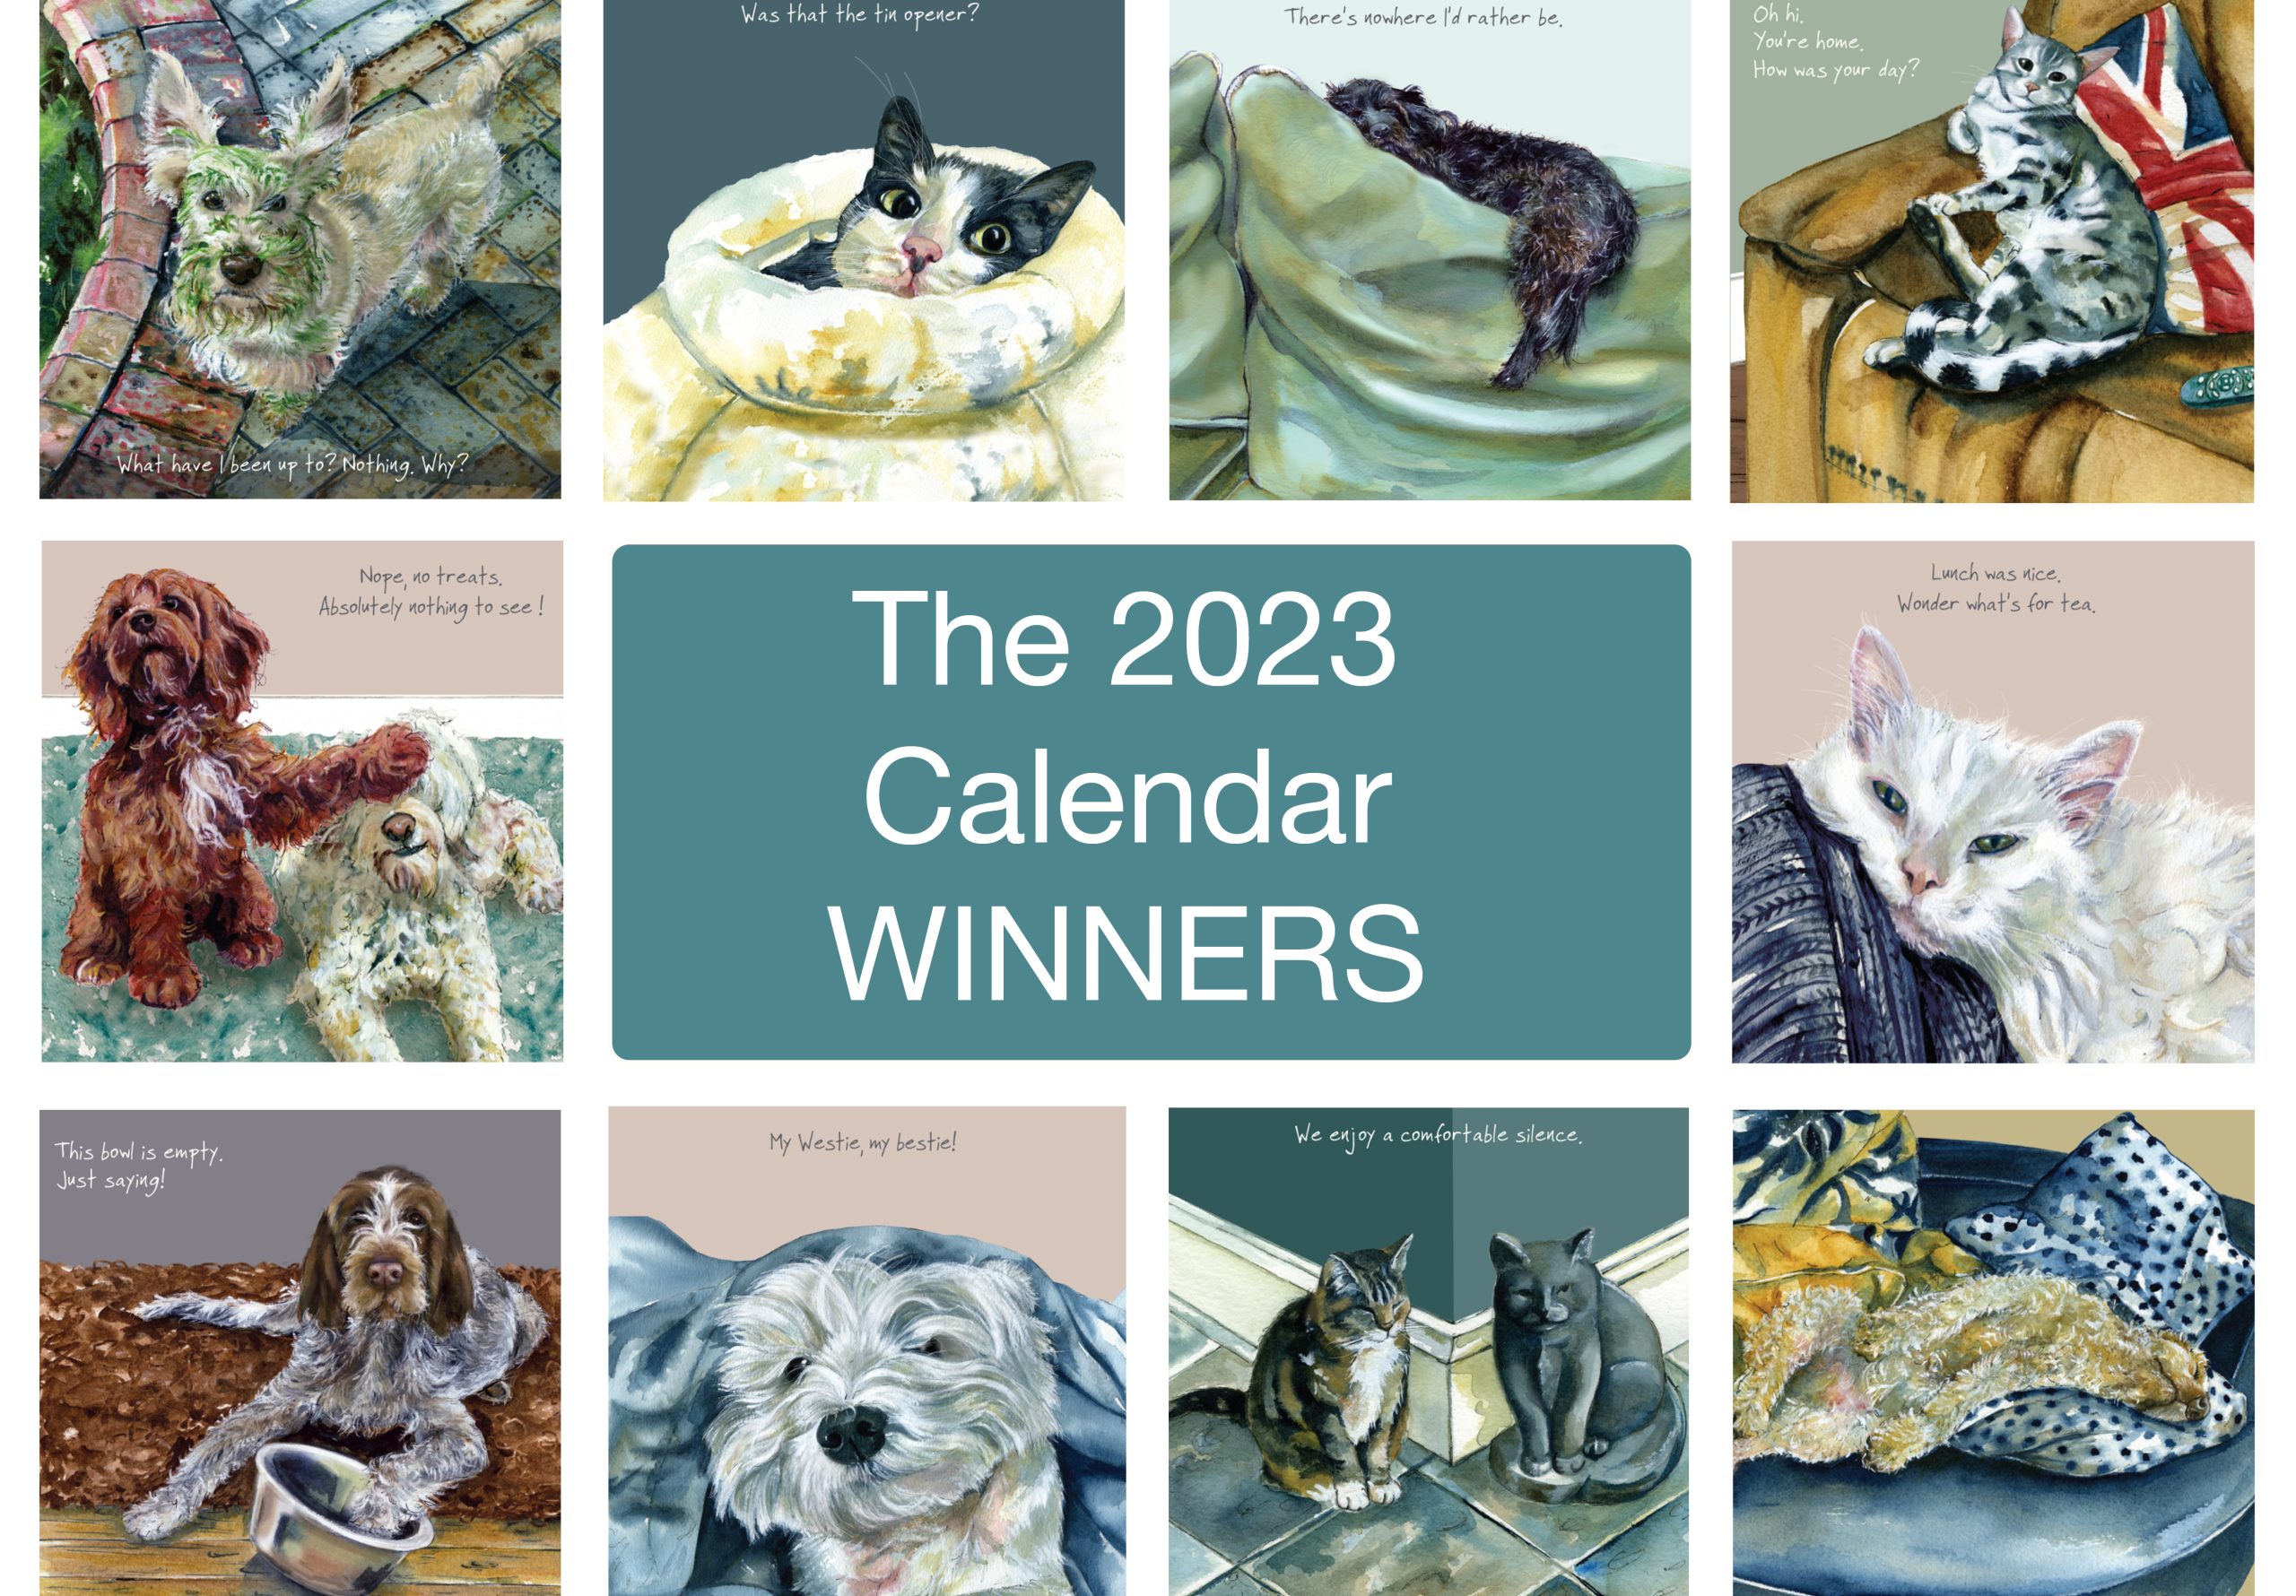 2023 Calendar Superstars | The Results! | The Little Dog Laughed